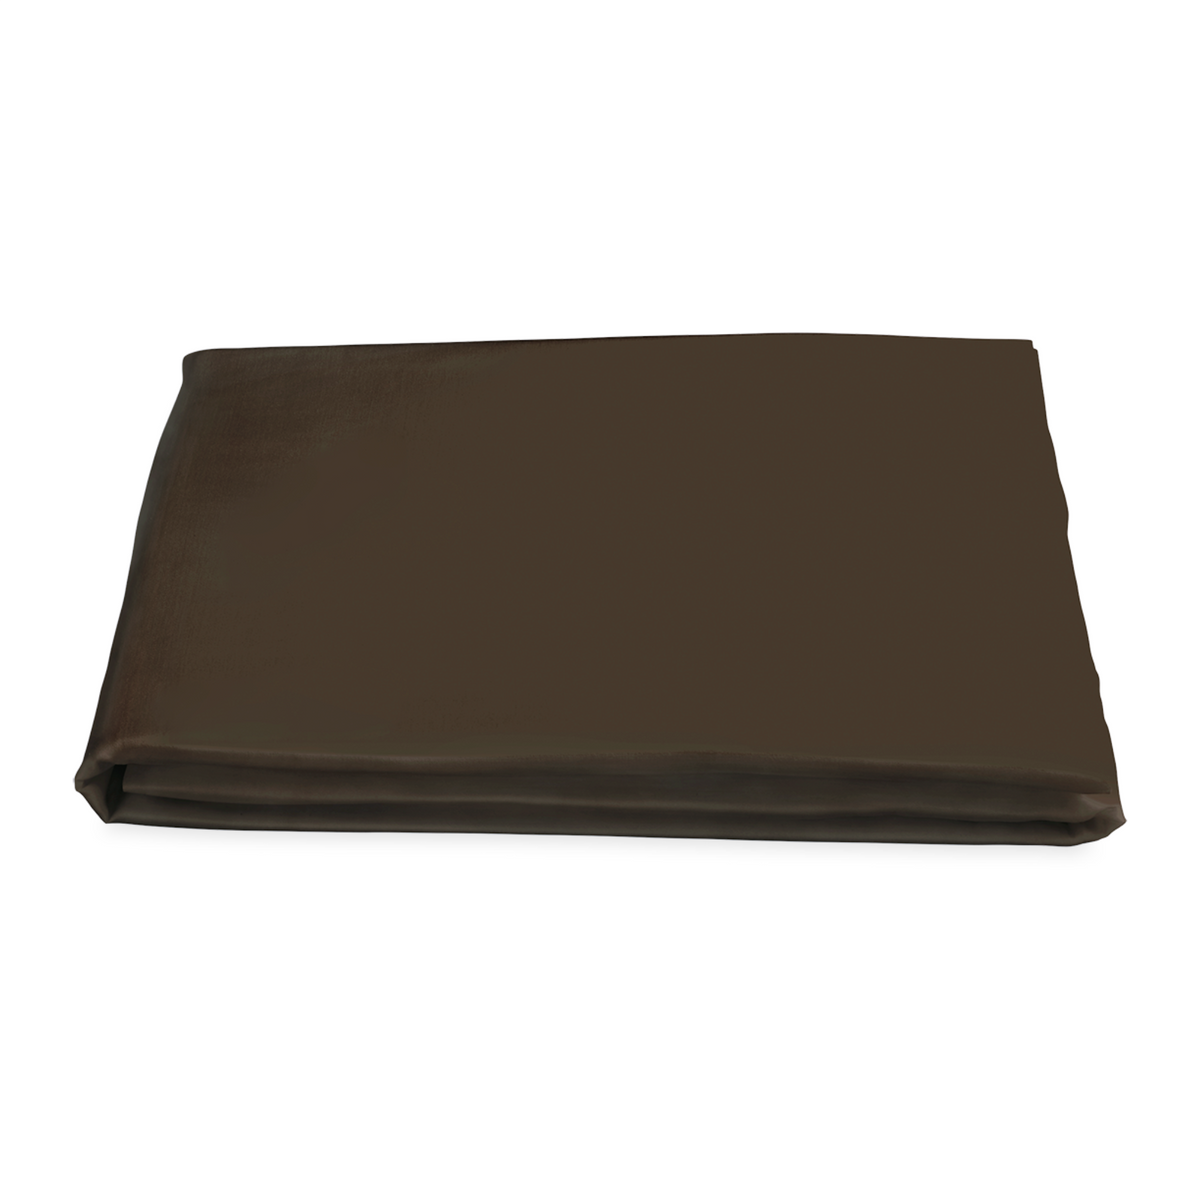 Fitted Sheet of Matouk Nocturne Bedding in Sable Color